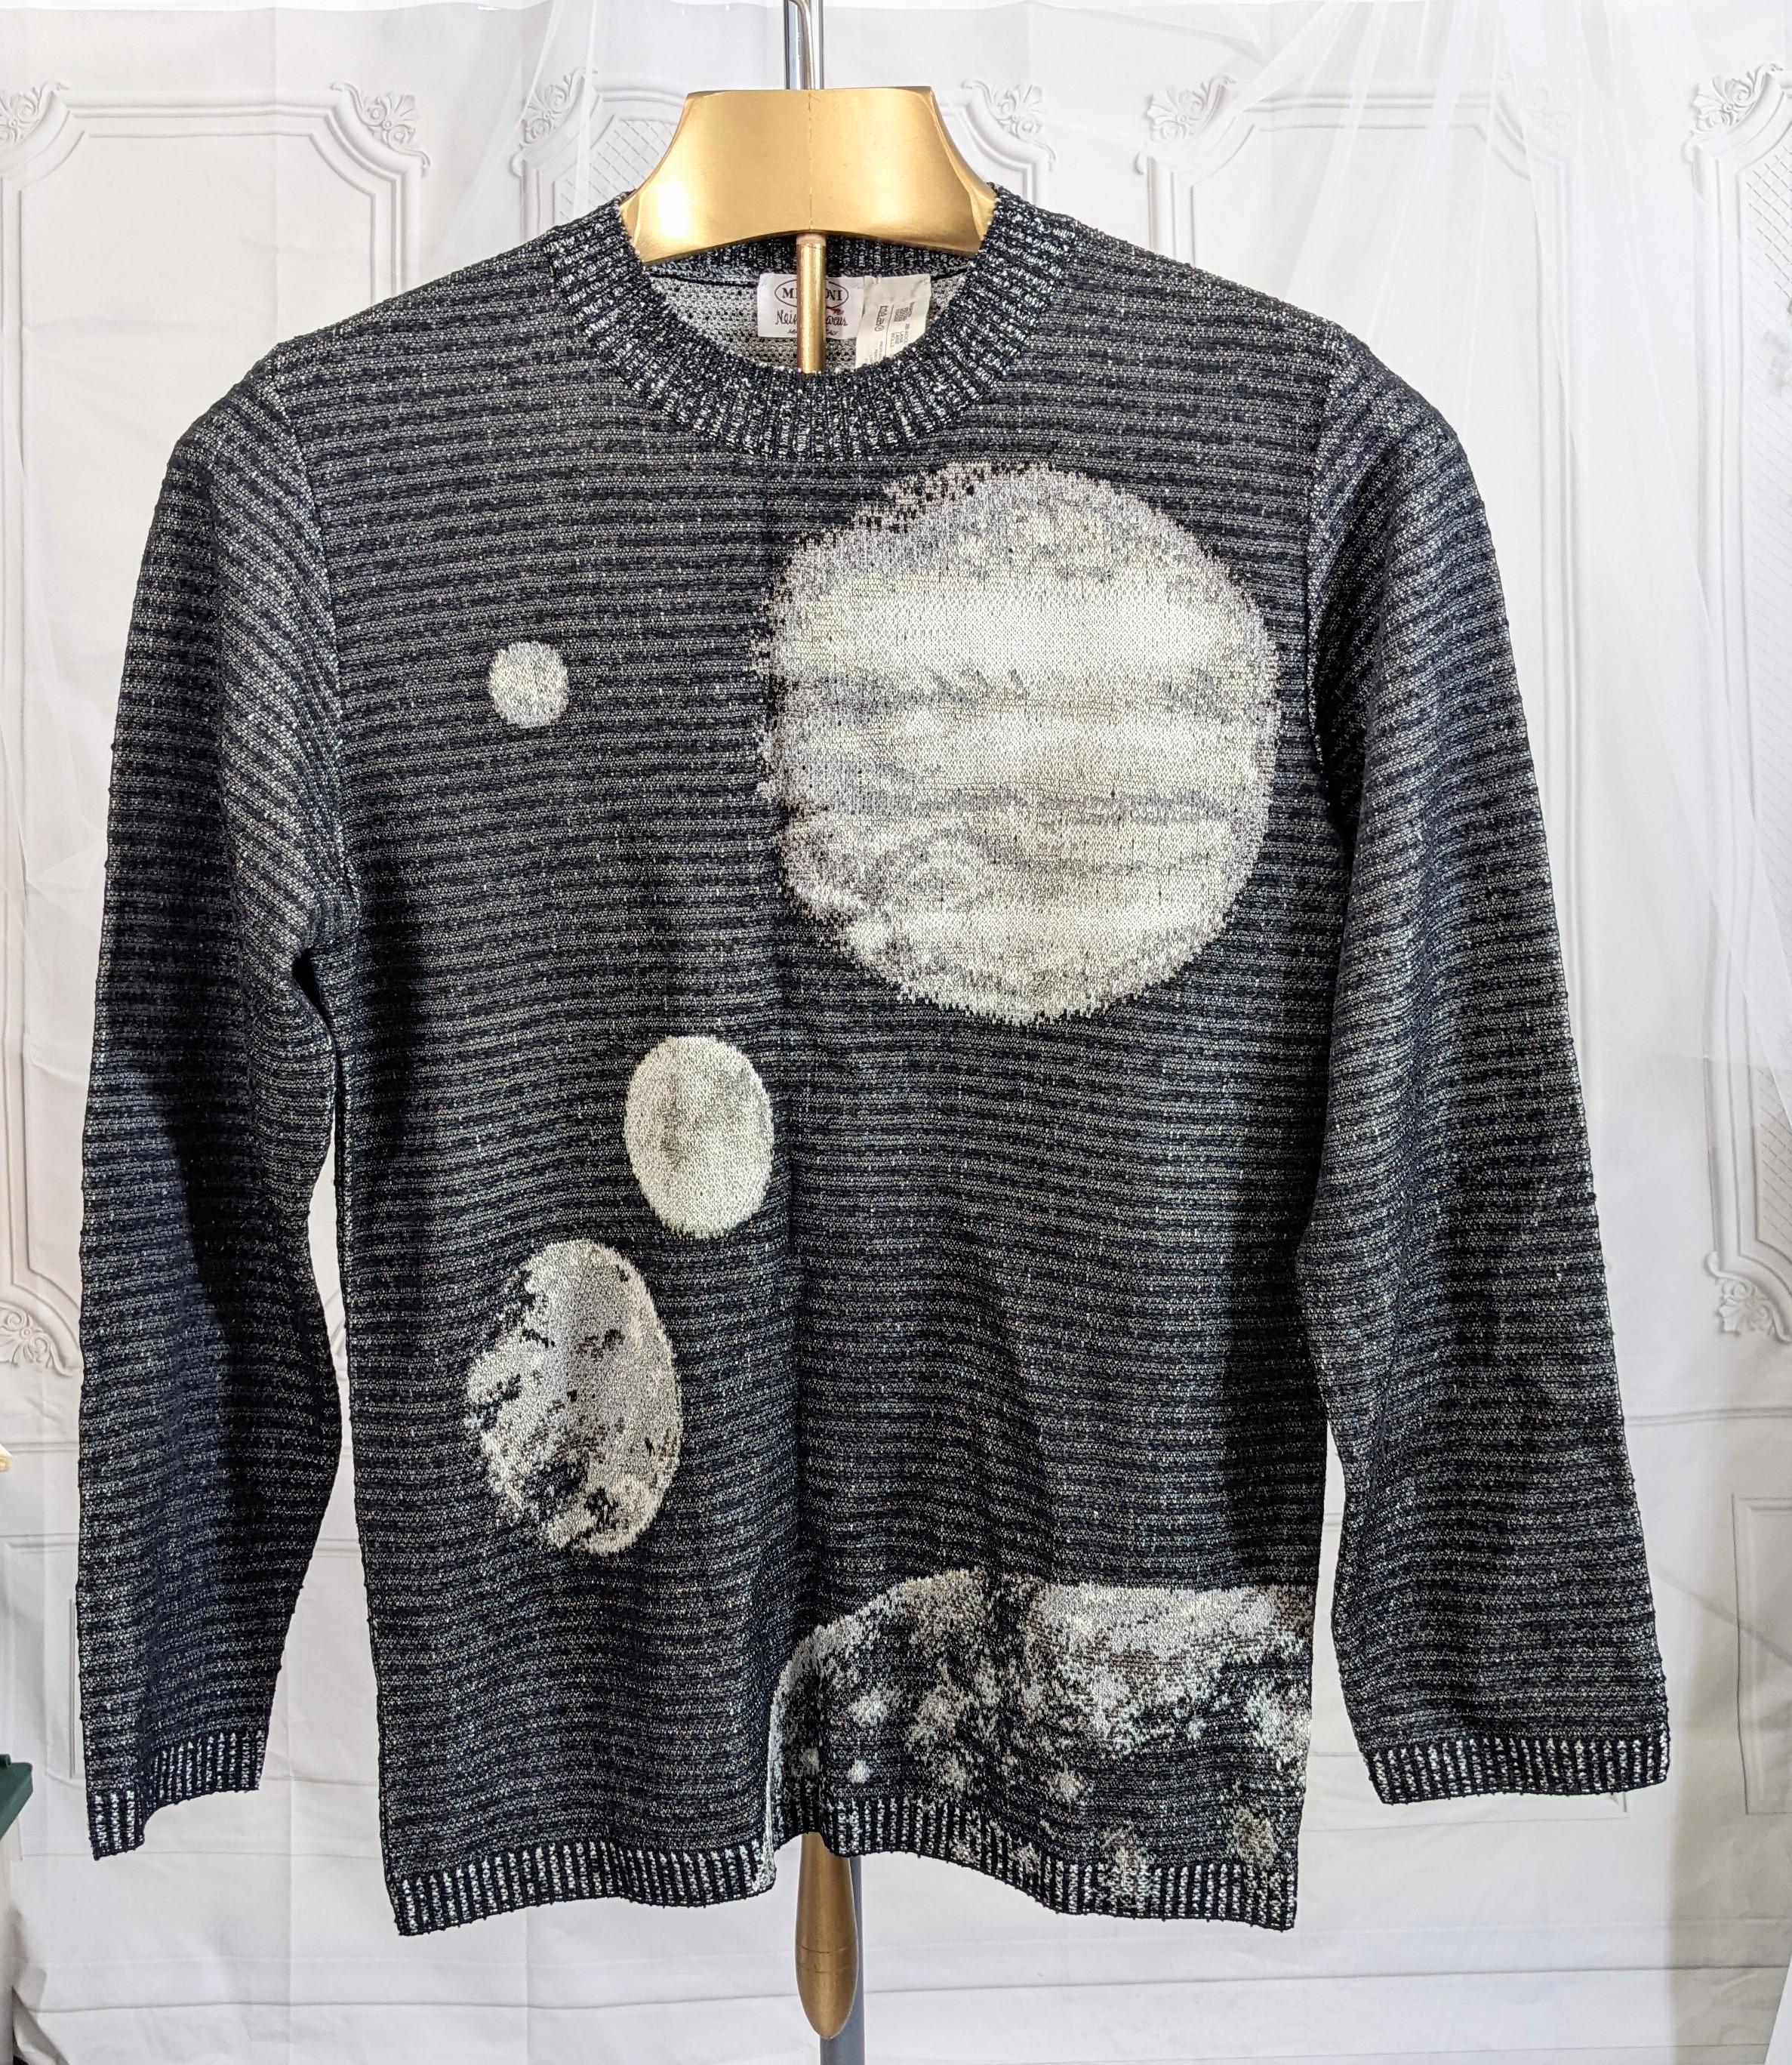 Amazing Missoni Mens Planetary Sweater from the 2000's. A very cool sweater suitable for women as well from a house not known for being typically edgy. Wonderful melange of colors and textures to create photo realistic patterns. 
No size label,